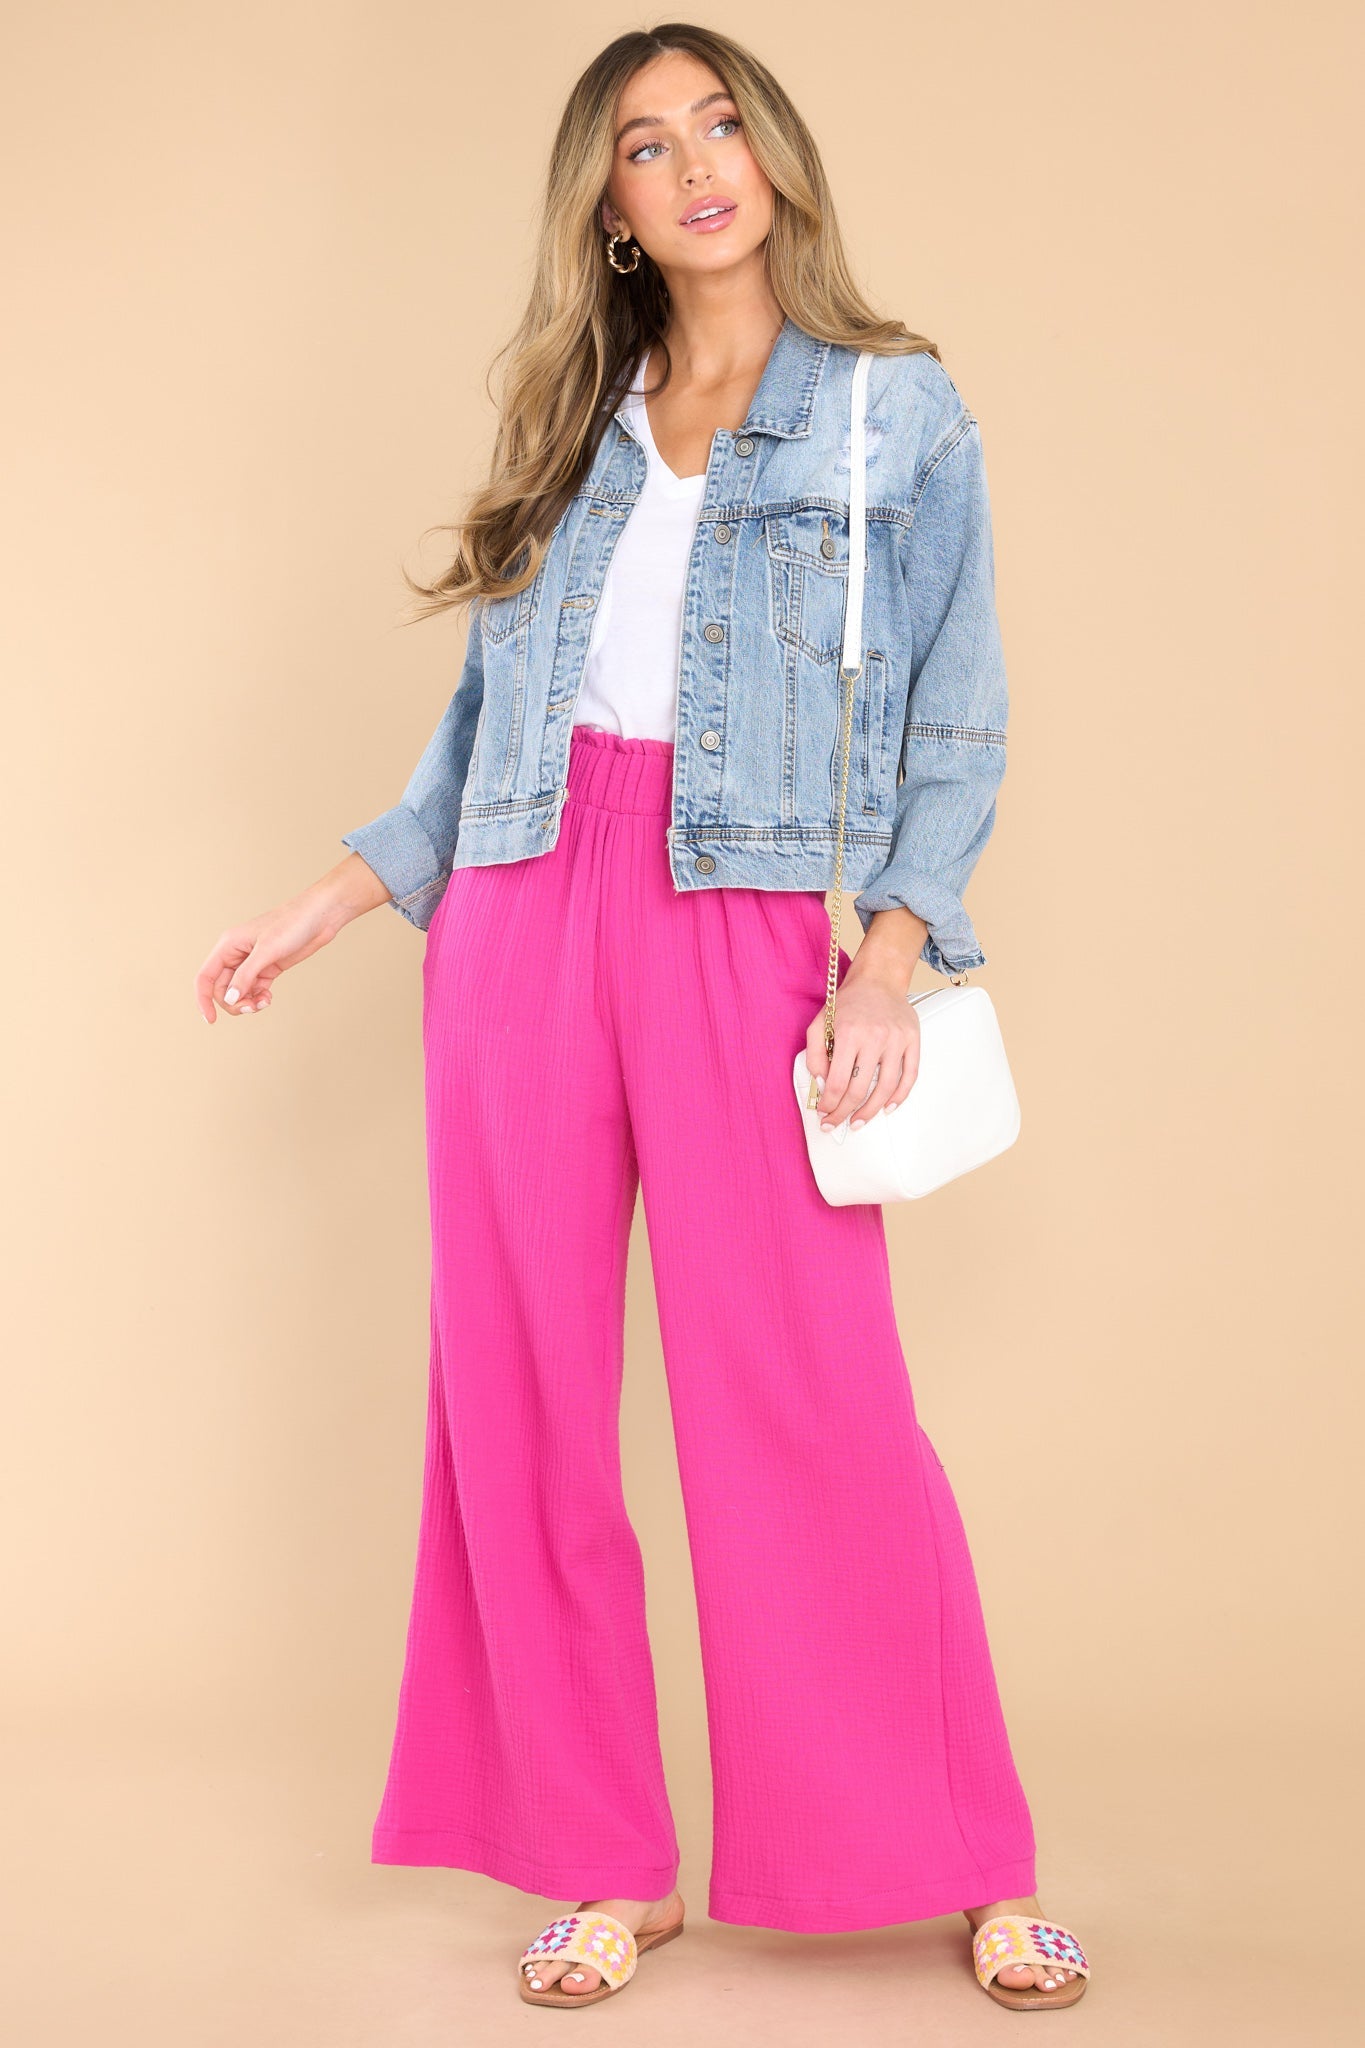 30 Stylish Pink Pants Outfit for Women - Outfit Styles